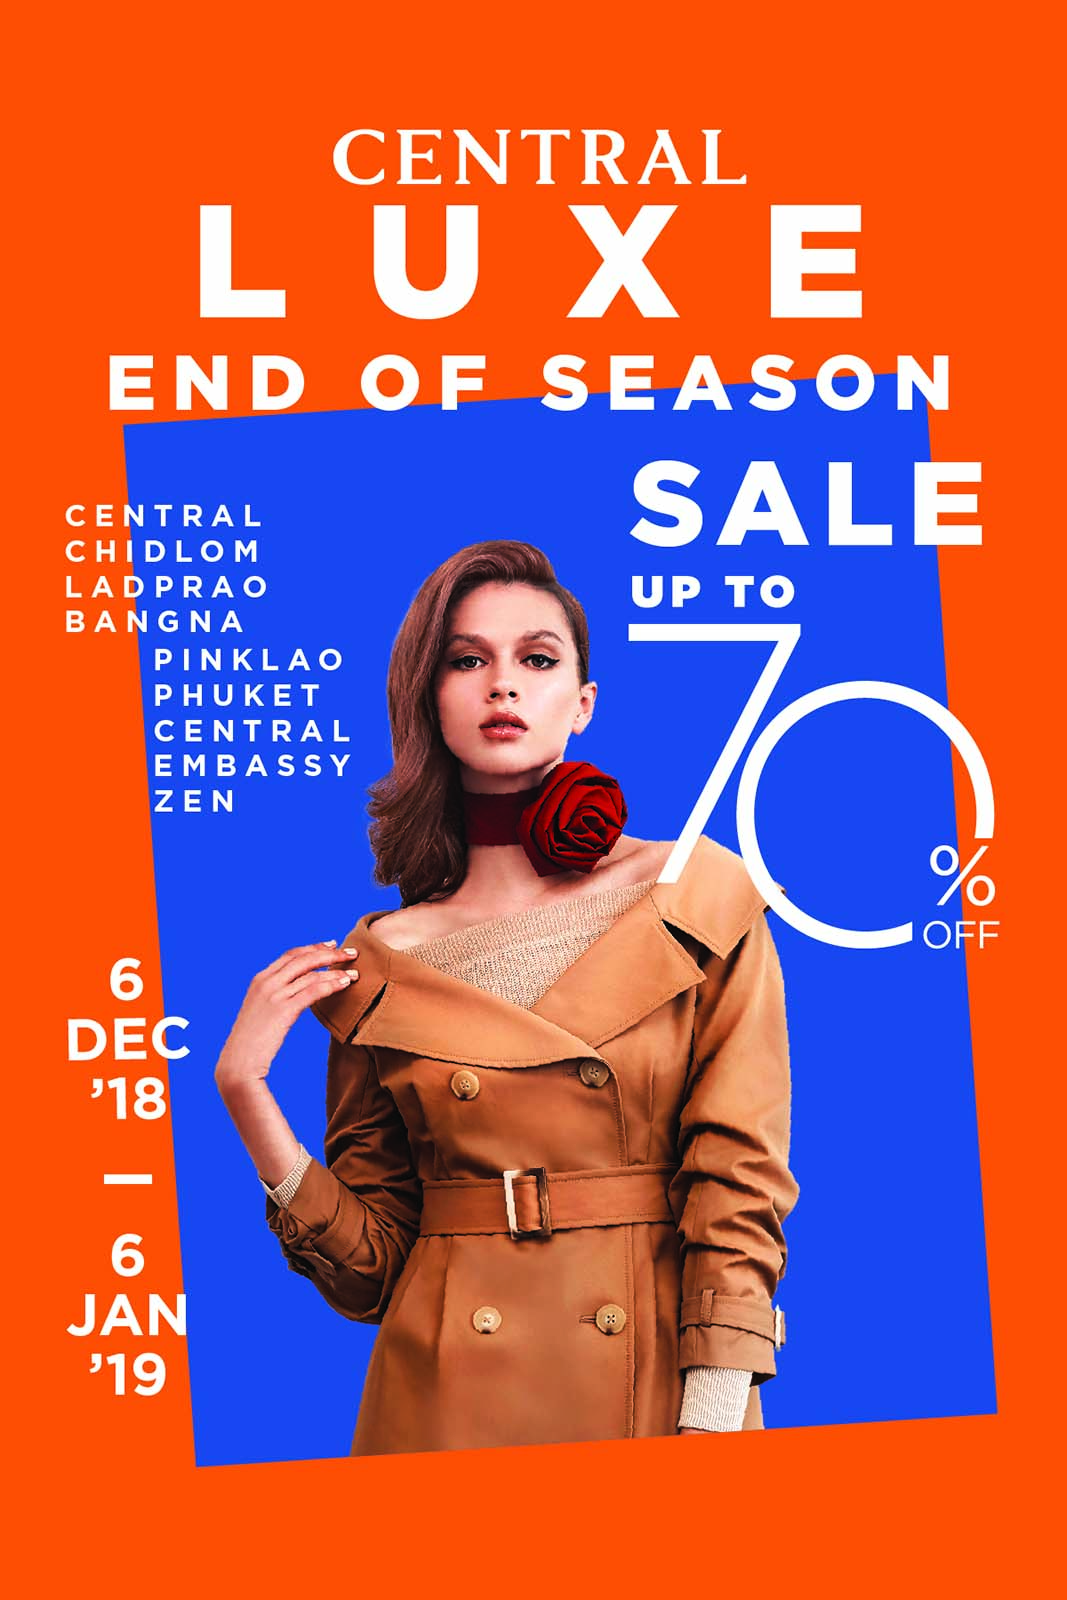 CENTRAL LUXE END OF SEASON SALE